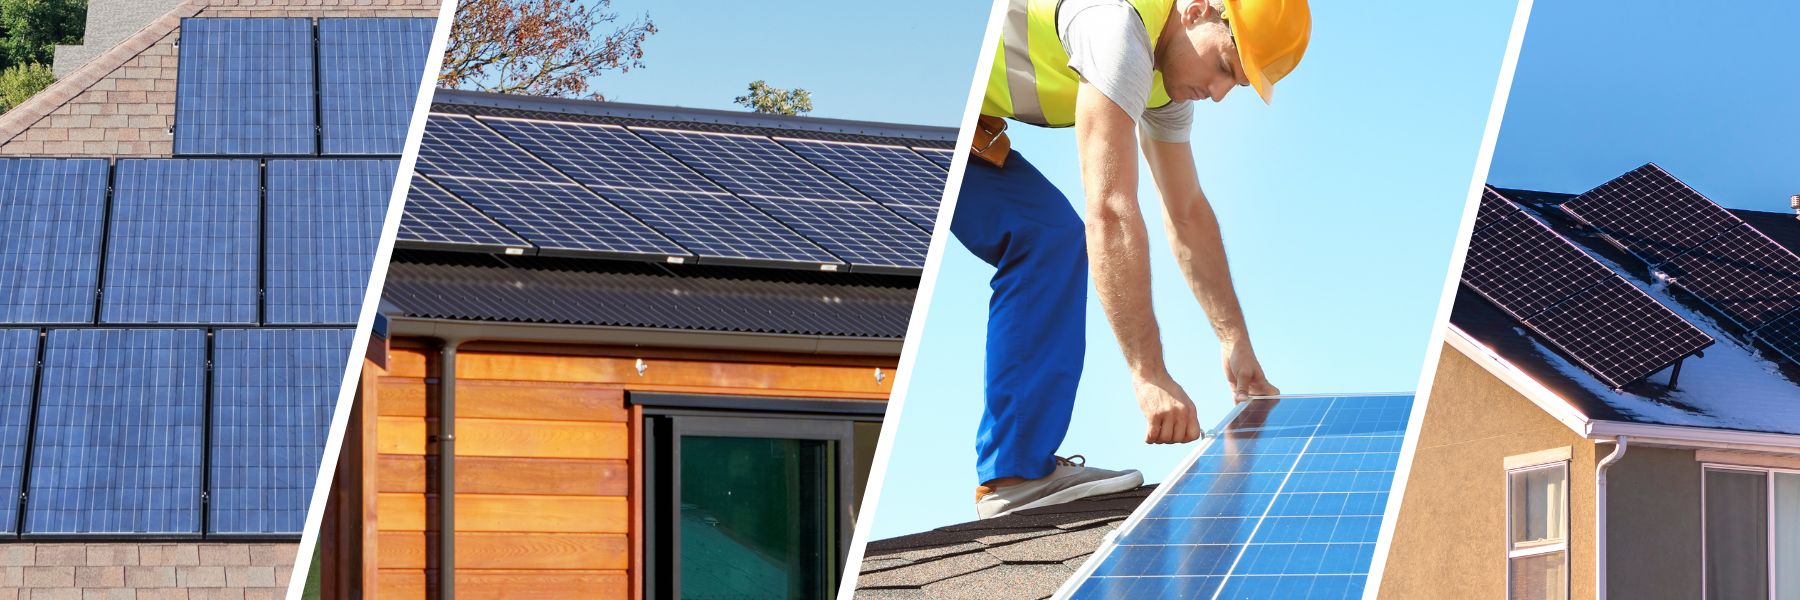 images of solar panels on residential roofs